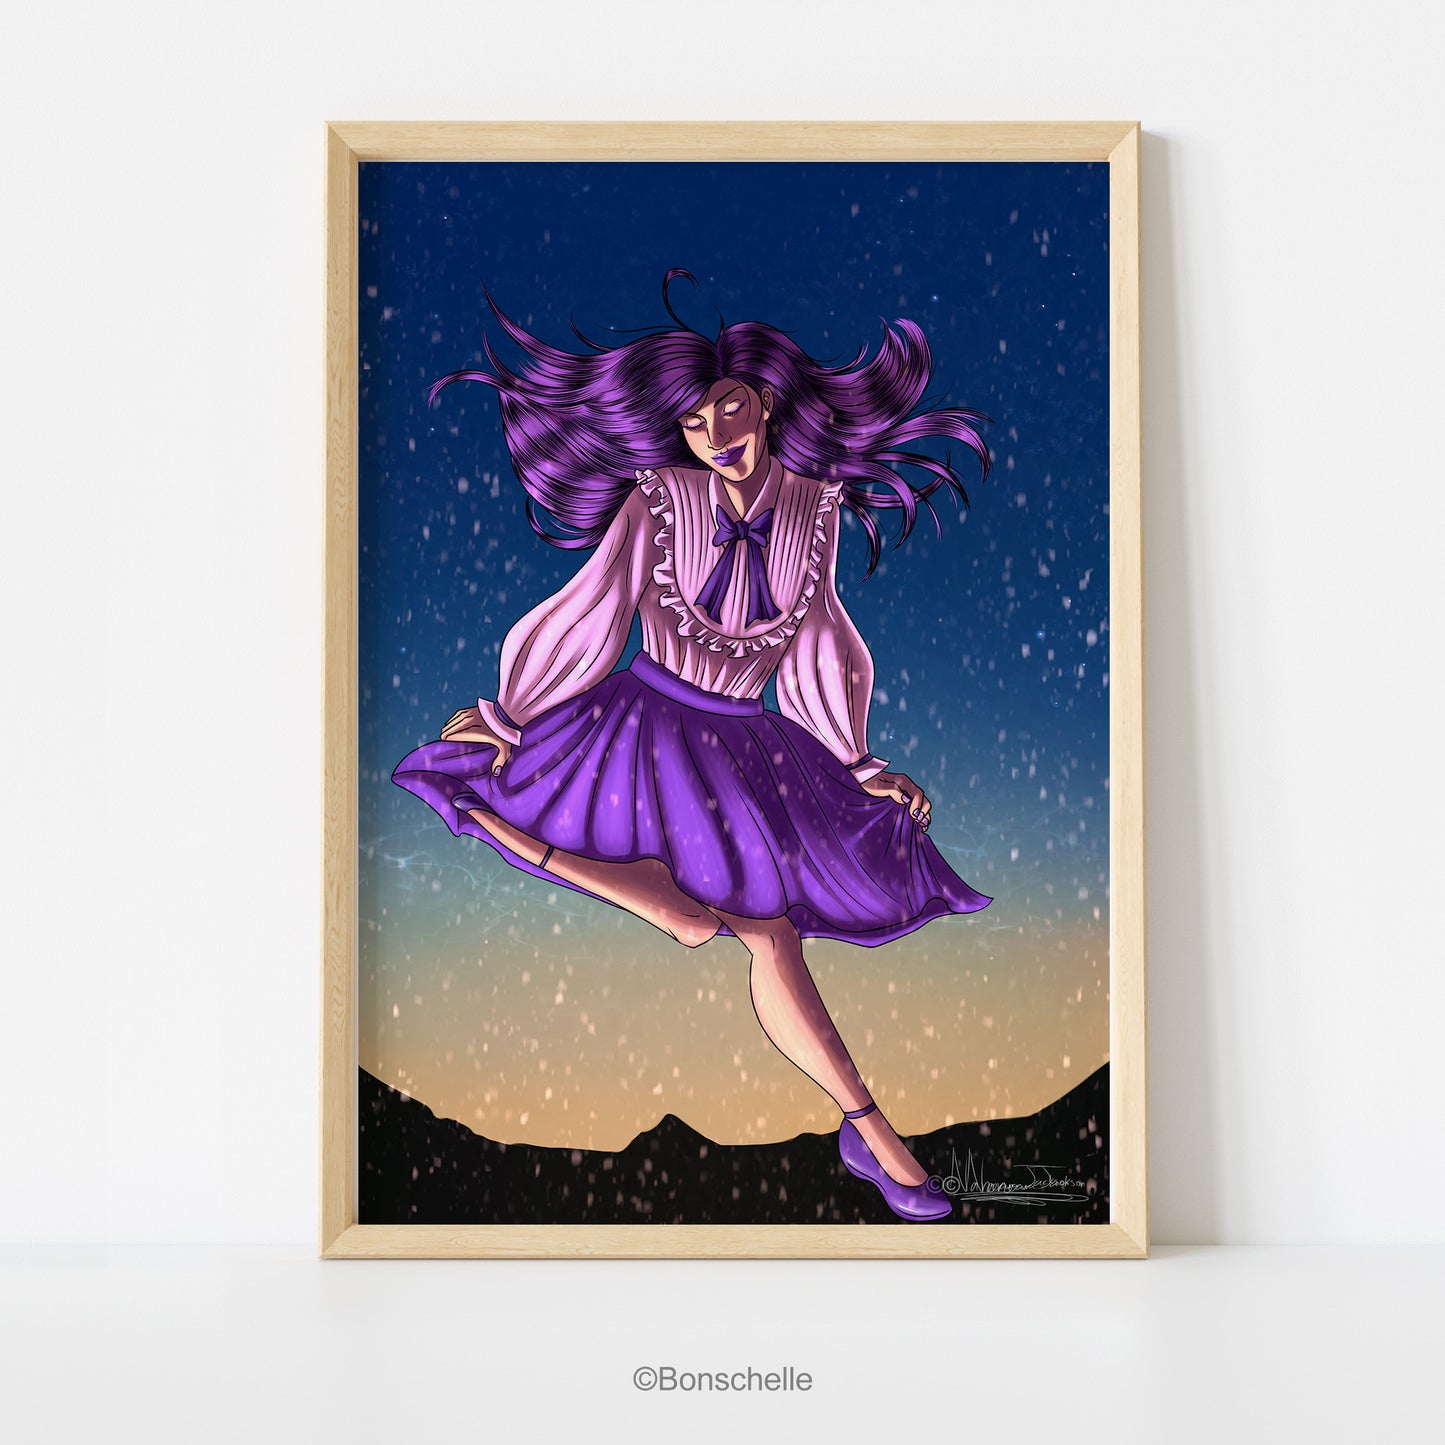 An original art print featuring a young girl in Lolita fashion dancing happily in the snow against an evening sky. The poster has a pinewood frame.